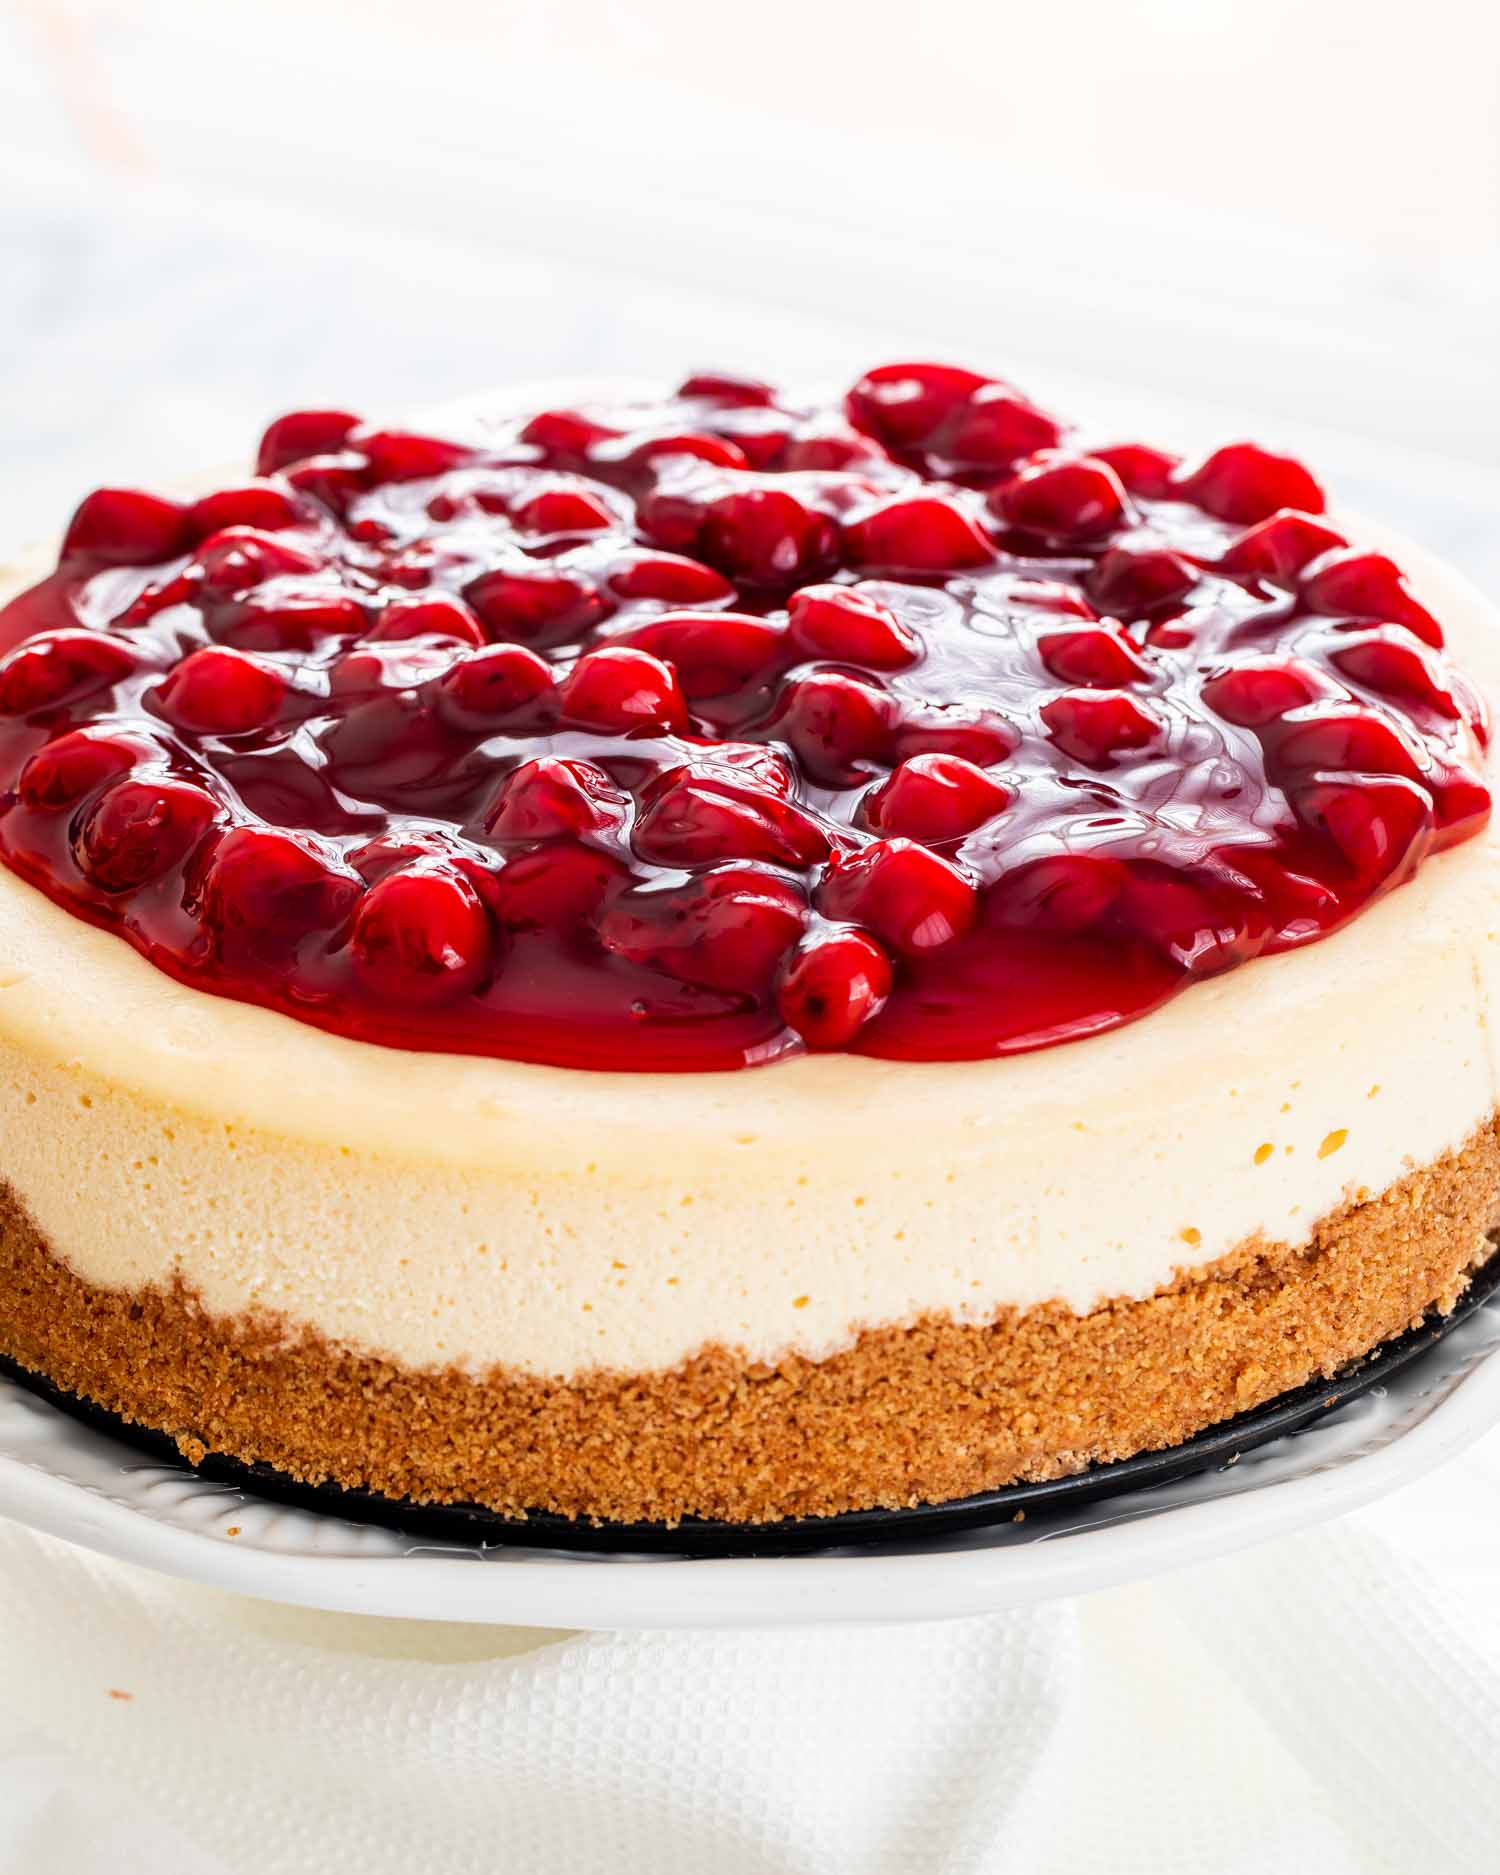 a cheesecake with cherry topping on a cake platter.